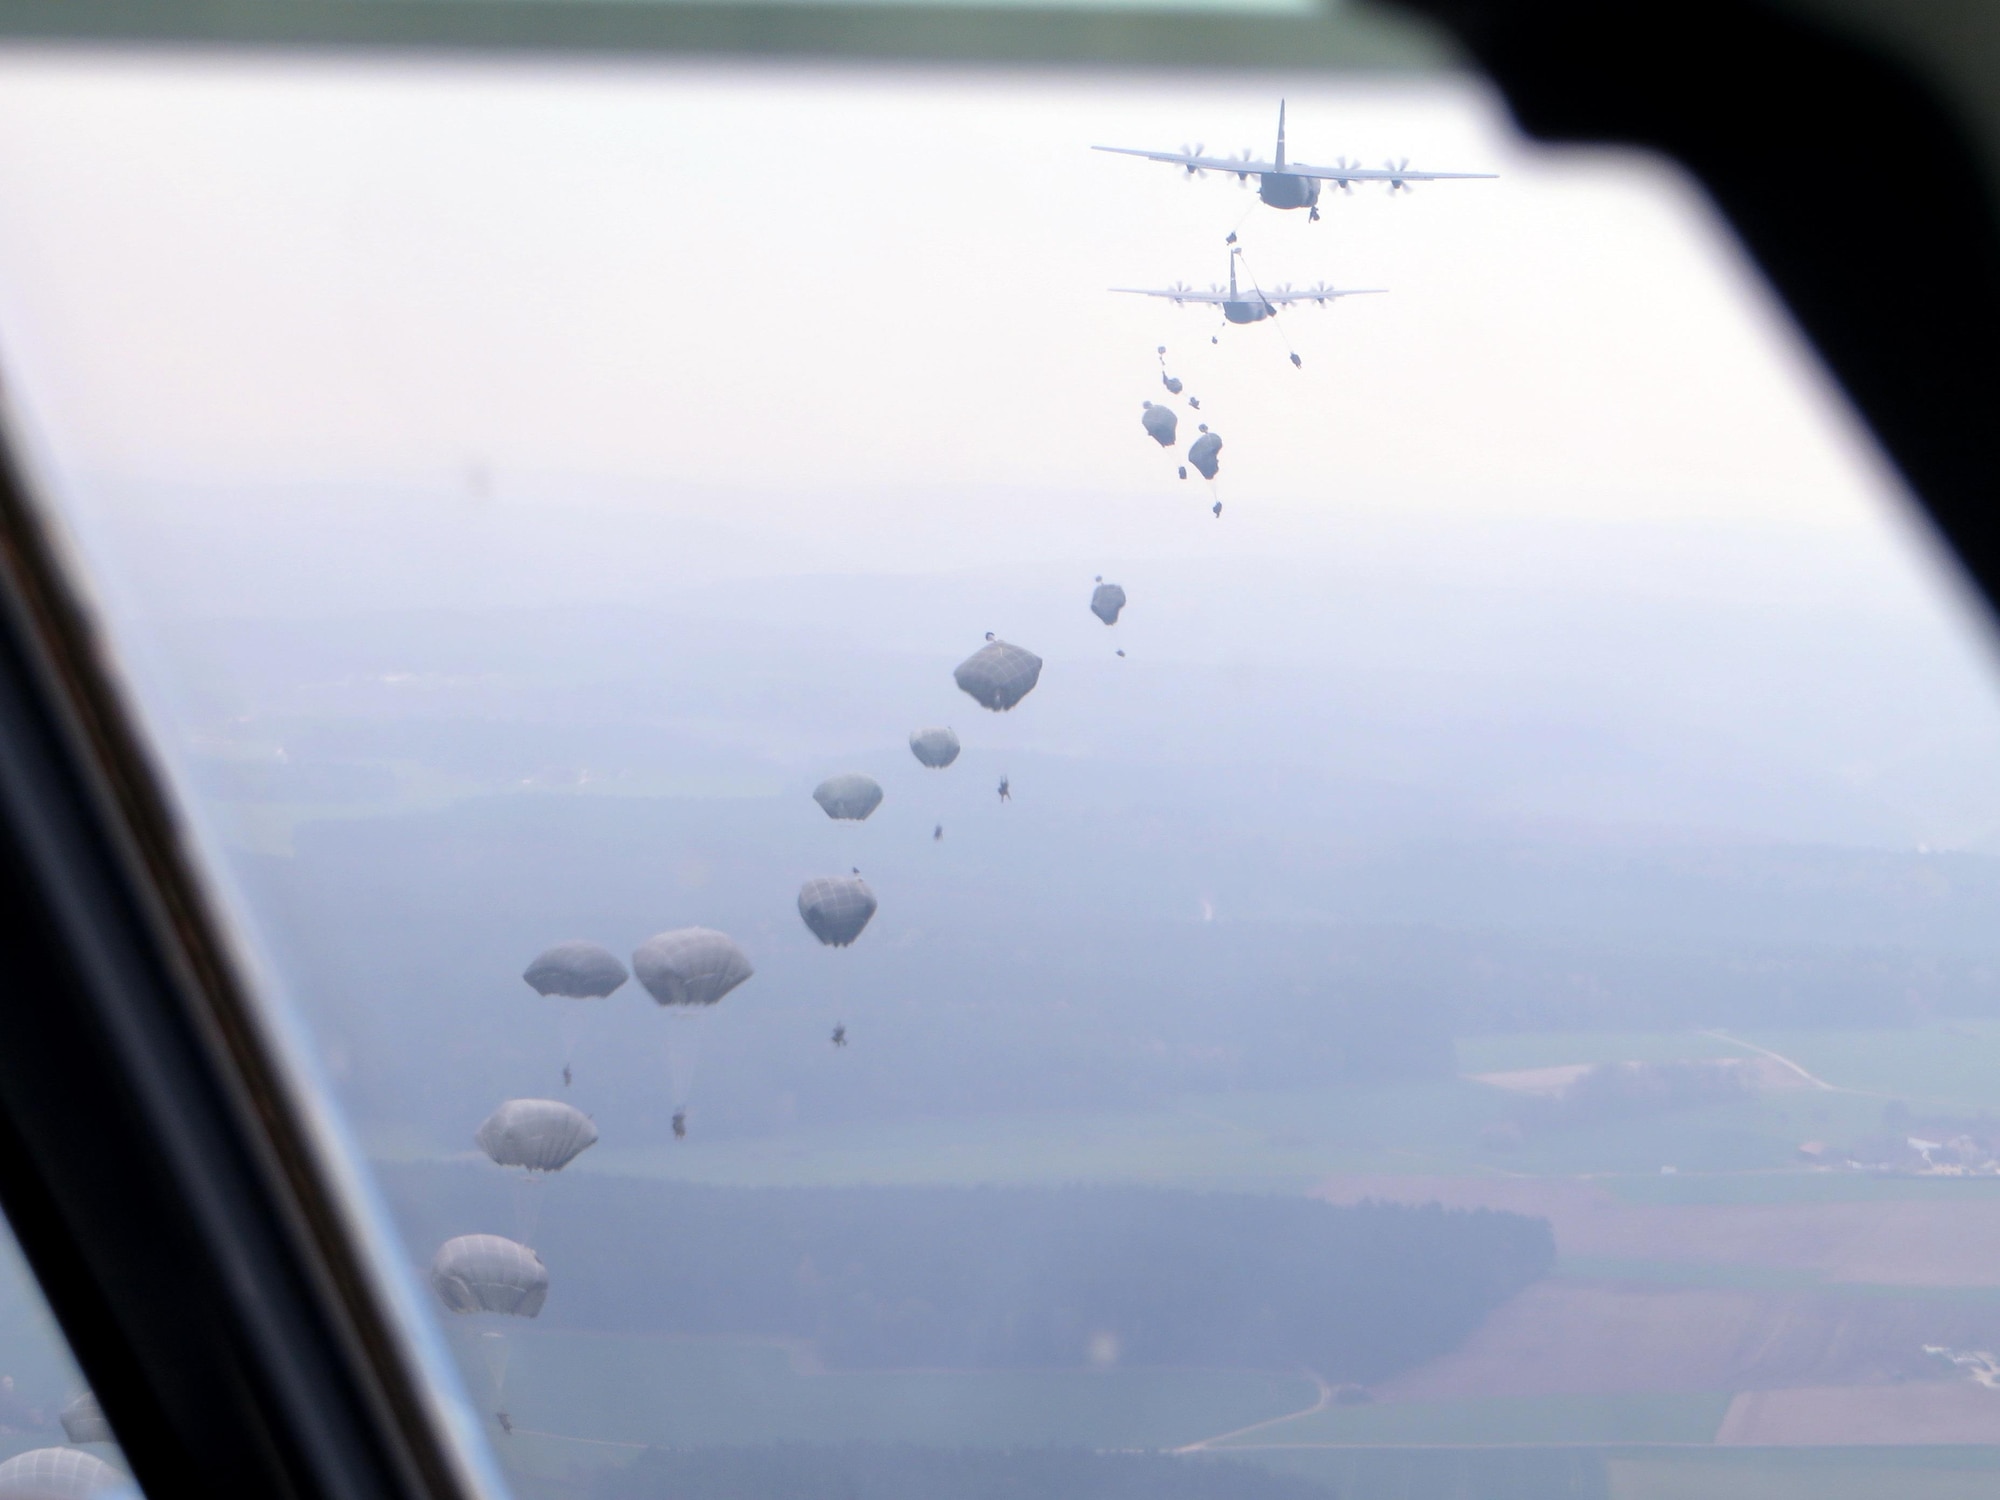 C-130s release paratroopers from the U.S. Army 173rd Airborne Brigade over Hohenfels, Germany during exercise Saber Junction 16, April 12, 2016. The Air Force Reserve’s 815th Airlift Squadron participated in the exercise April 5-20, 2016. (U.S. Air Force photo/Maj. Dave Hogue)